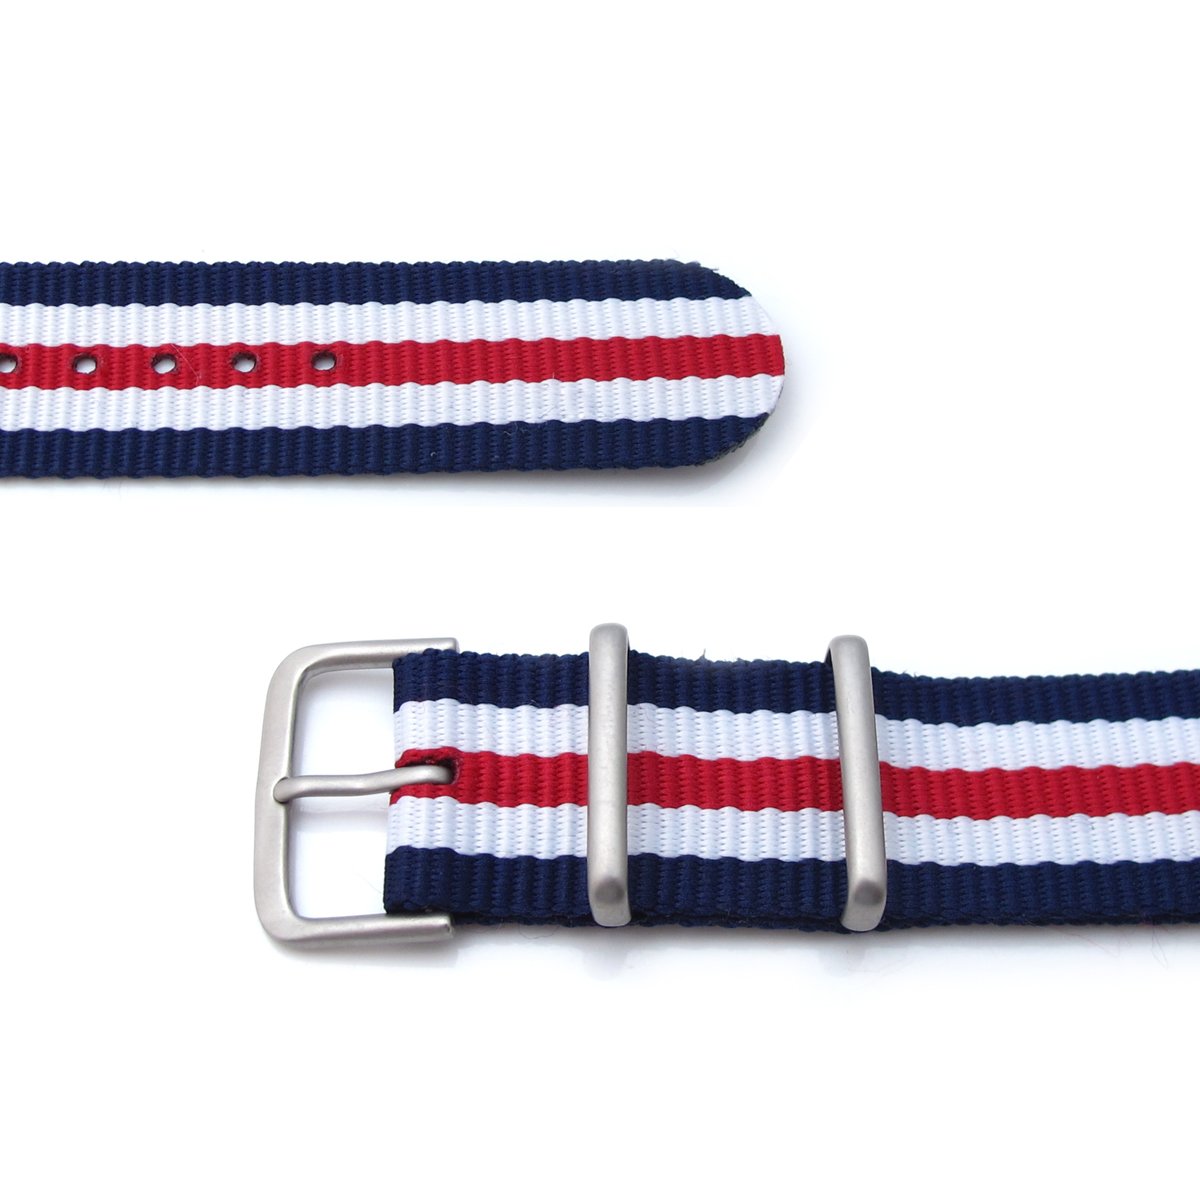 MiLTAT 18mm or 22mm G10 military watch strap ballistic nylon armband Sandblasted Navy White & Red Strapcode Watch Bands